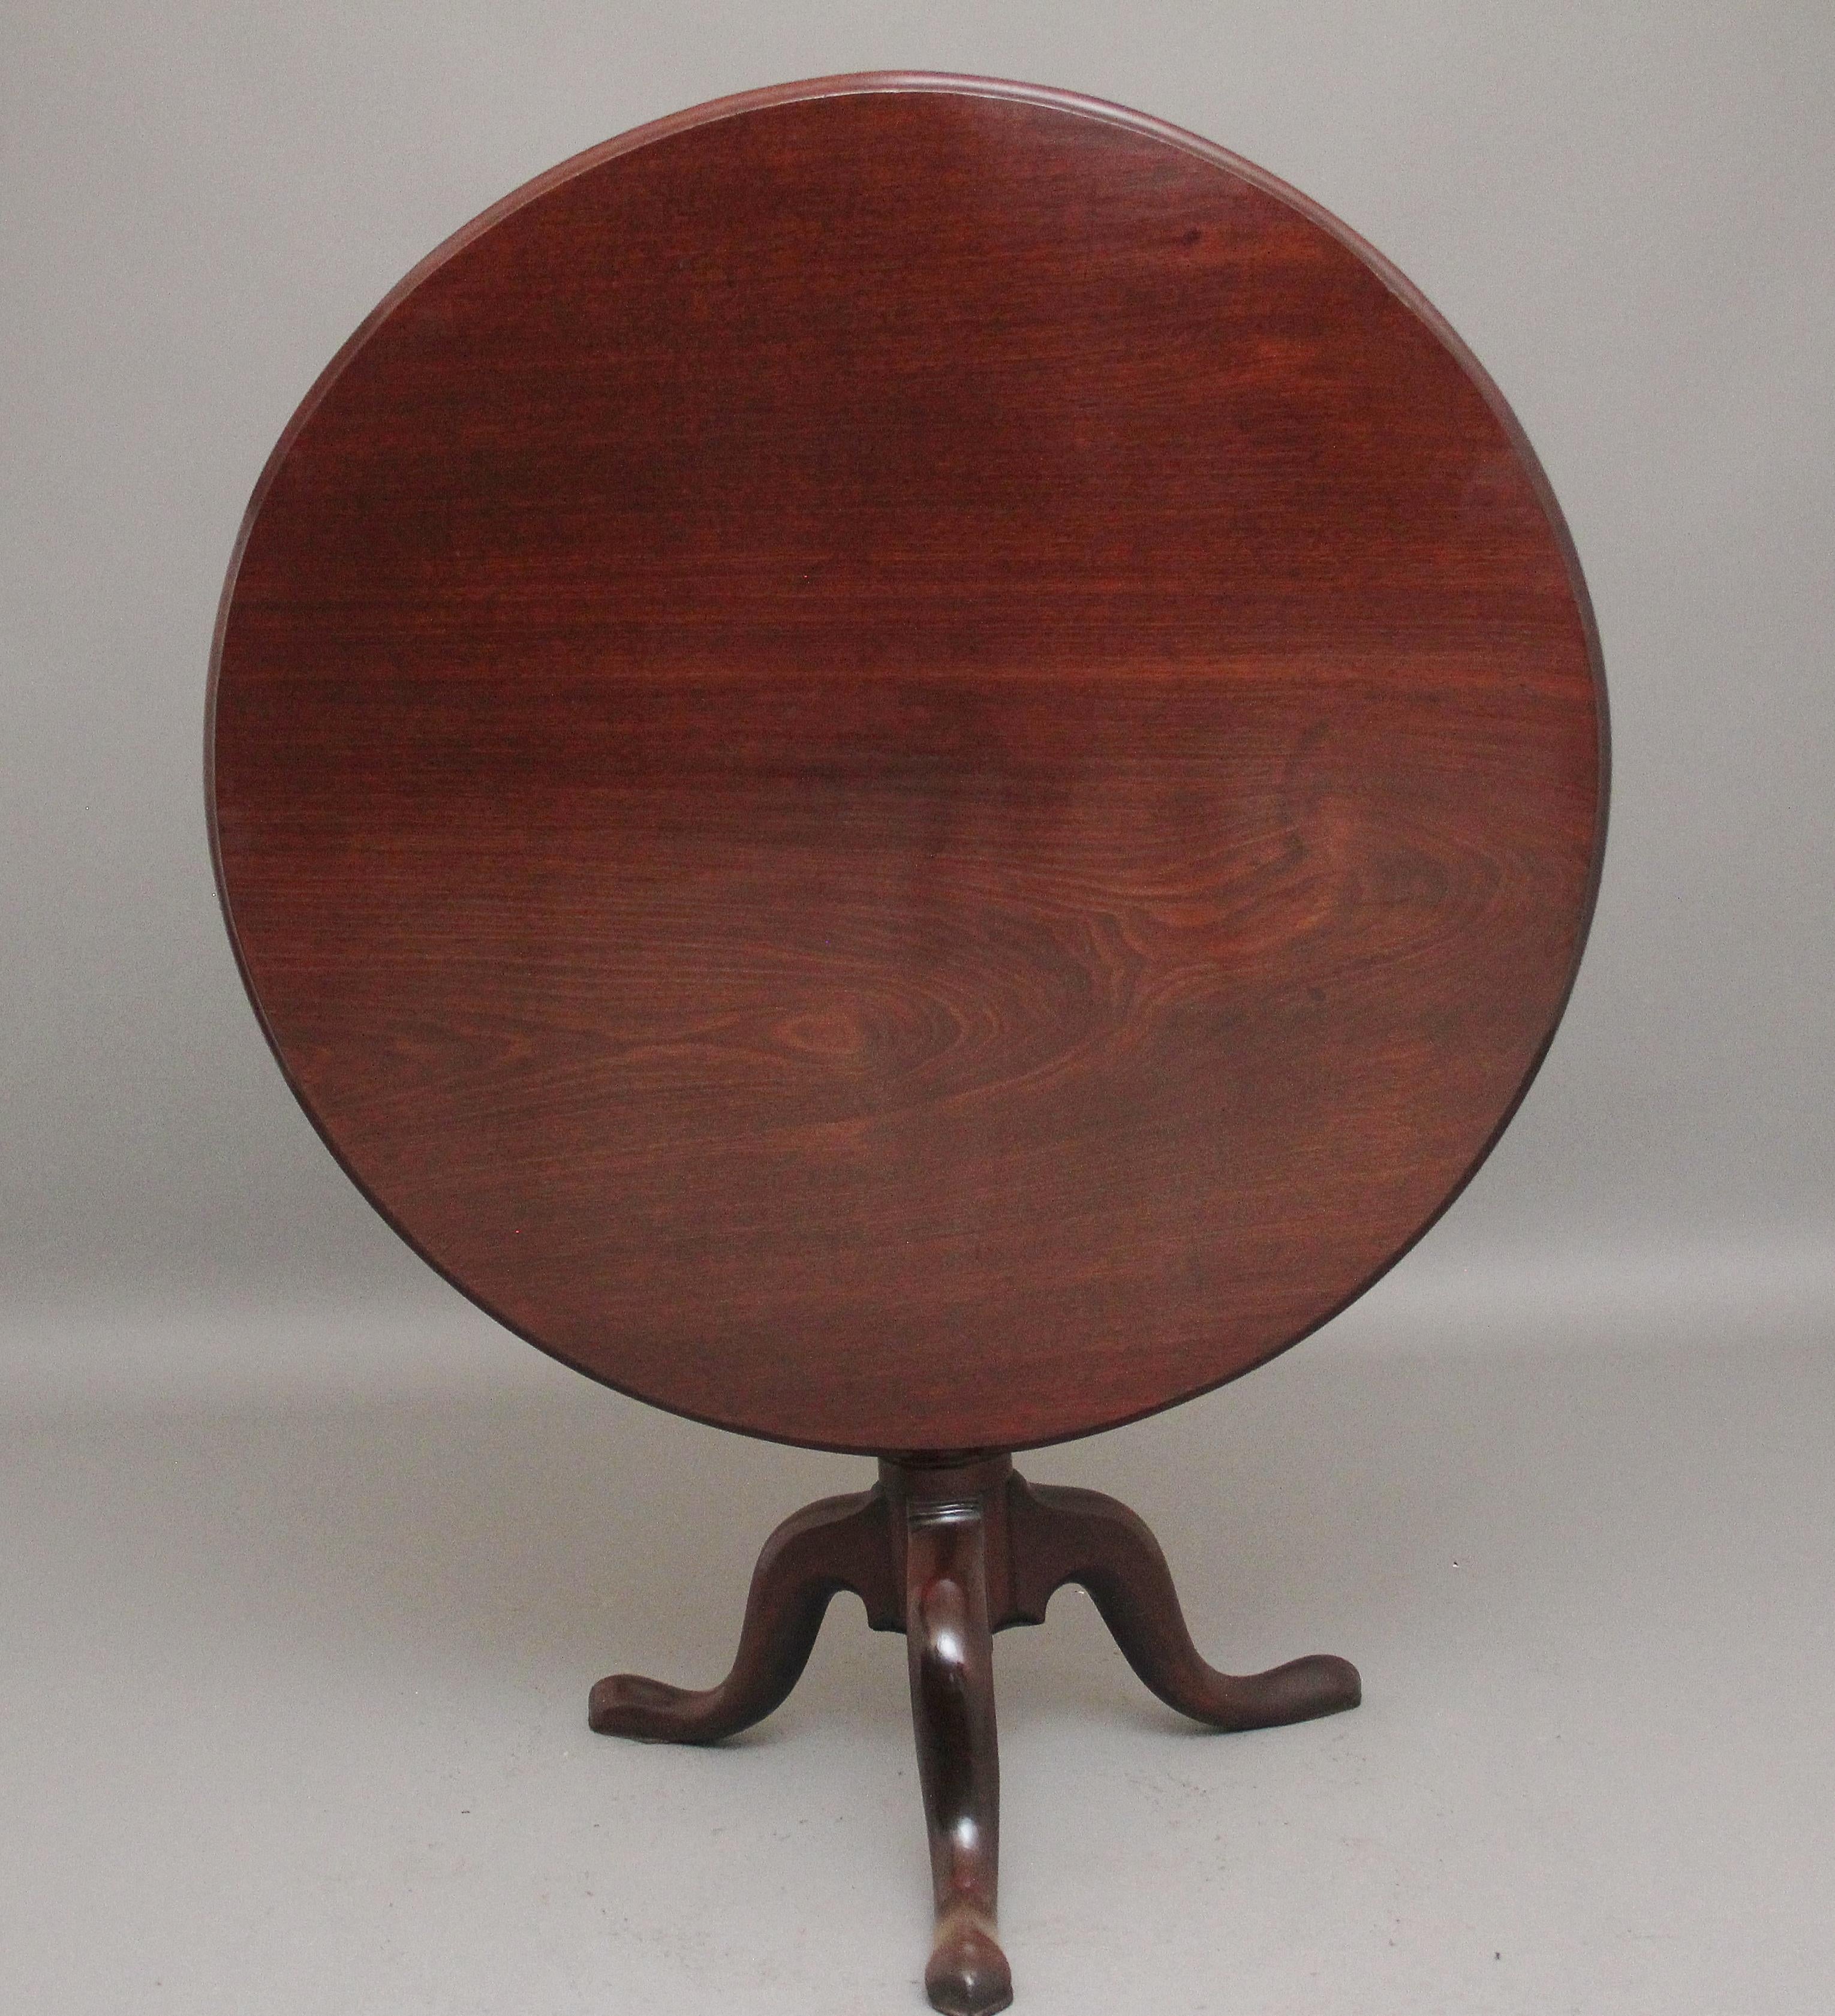 A large 18th Century mahogany tripod table, having a lovely figured circular top, supported on wonderfully turned and carved column terminating with three slender shaped legs, in fantastic condition and having a nice warm mahogany colour.  Circa